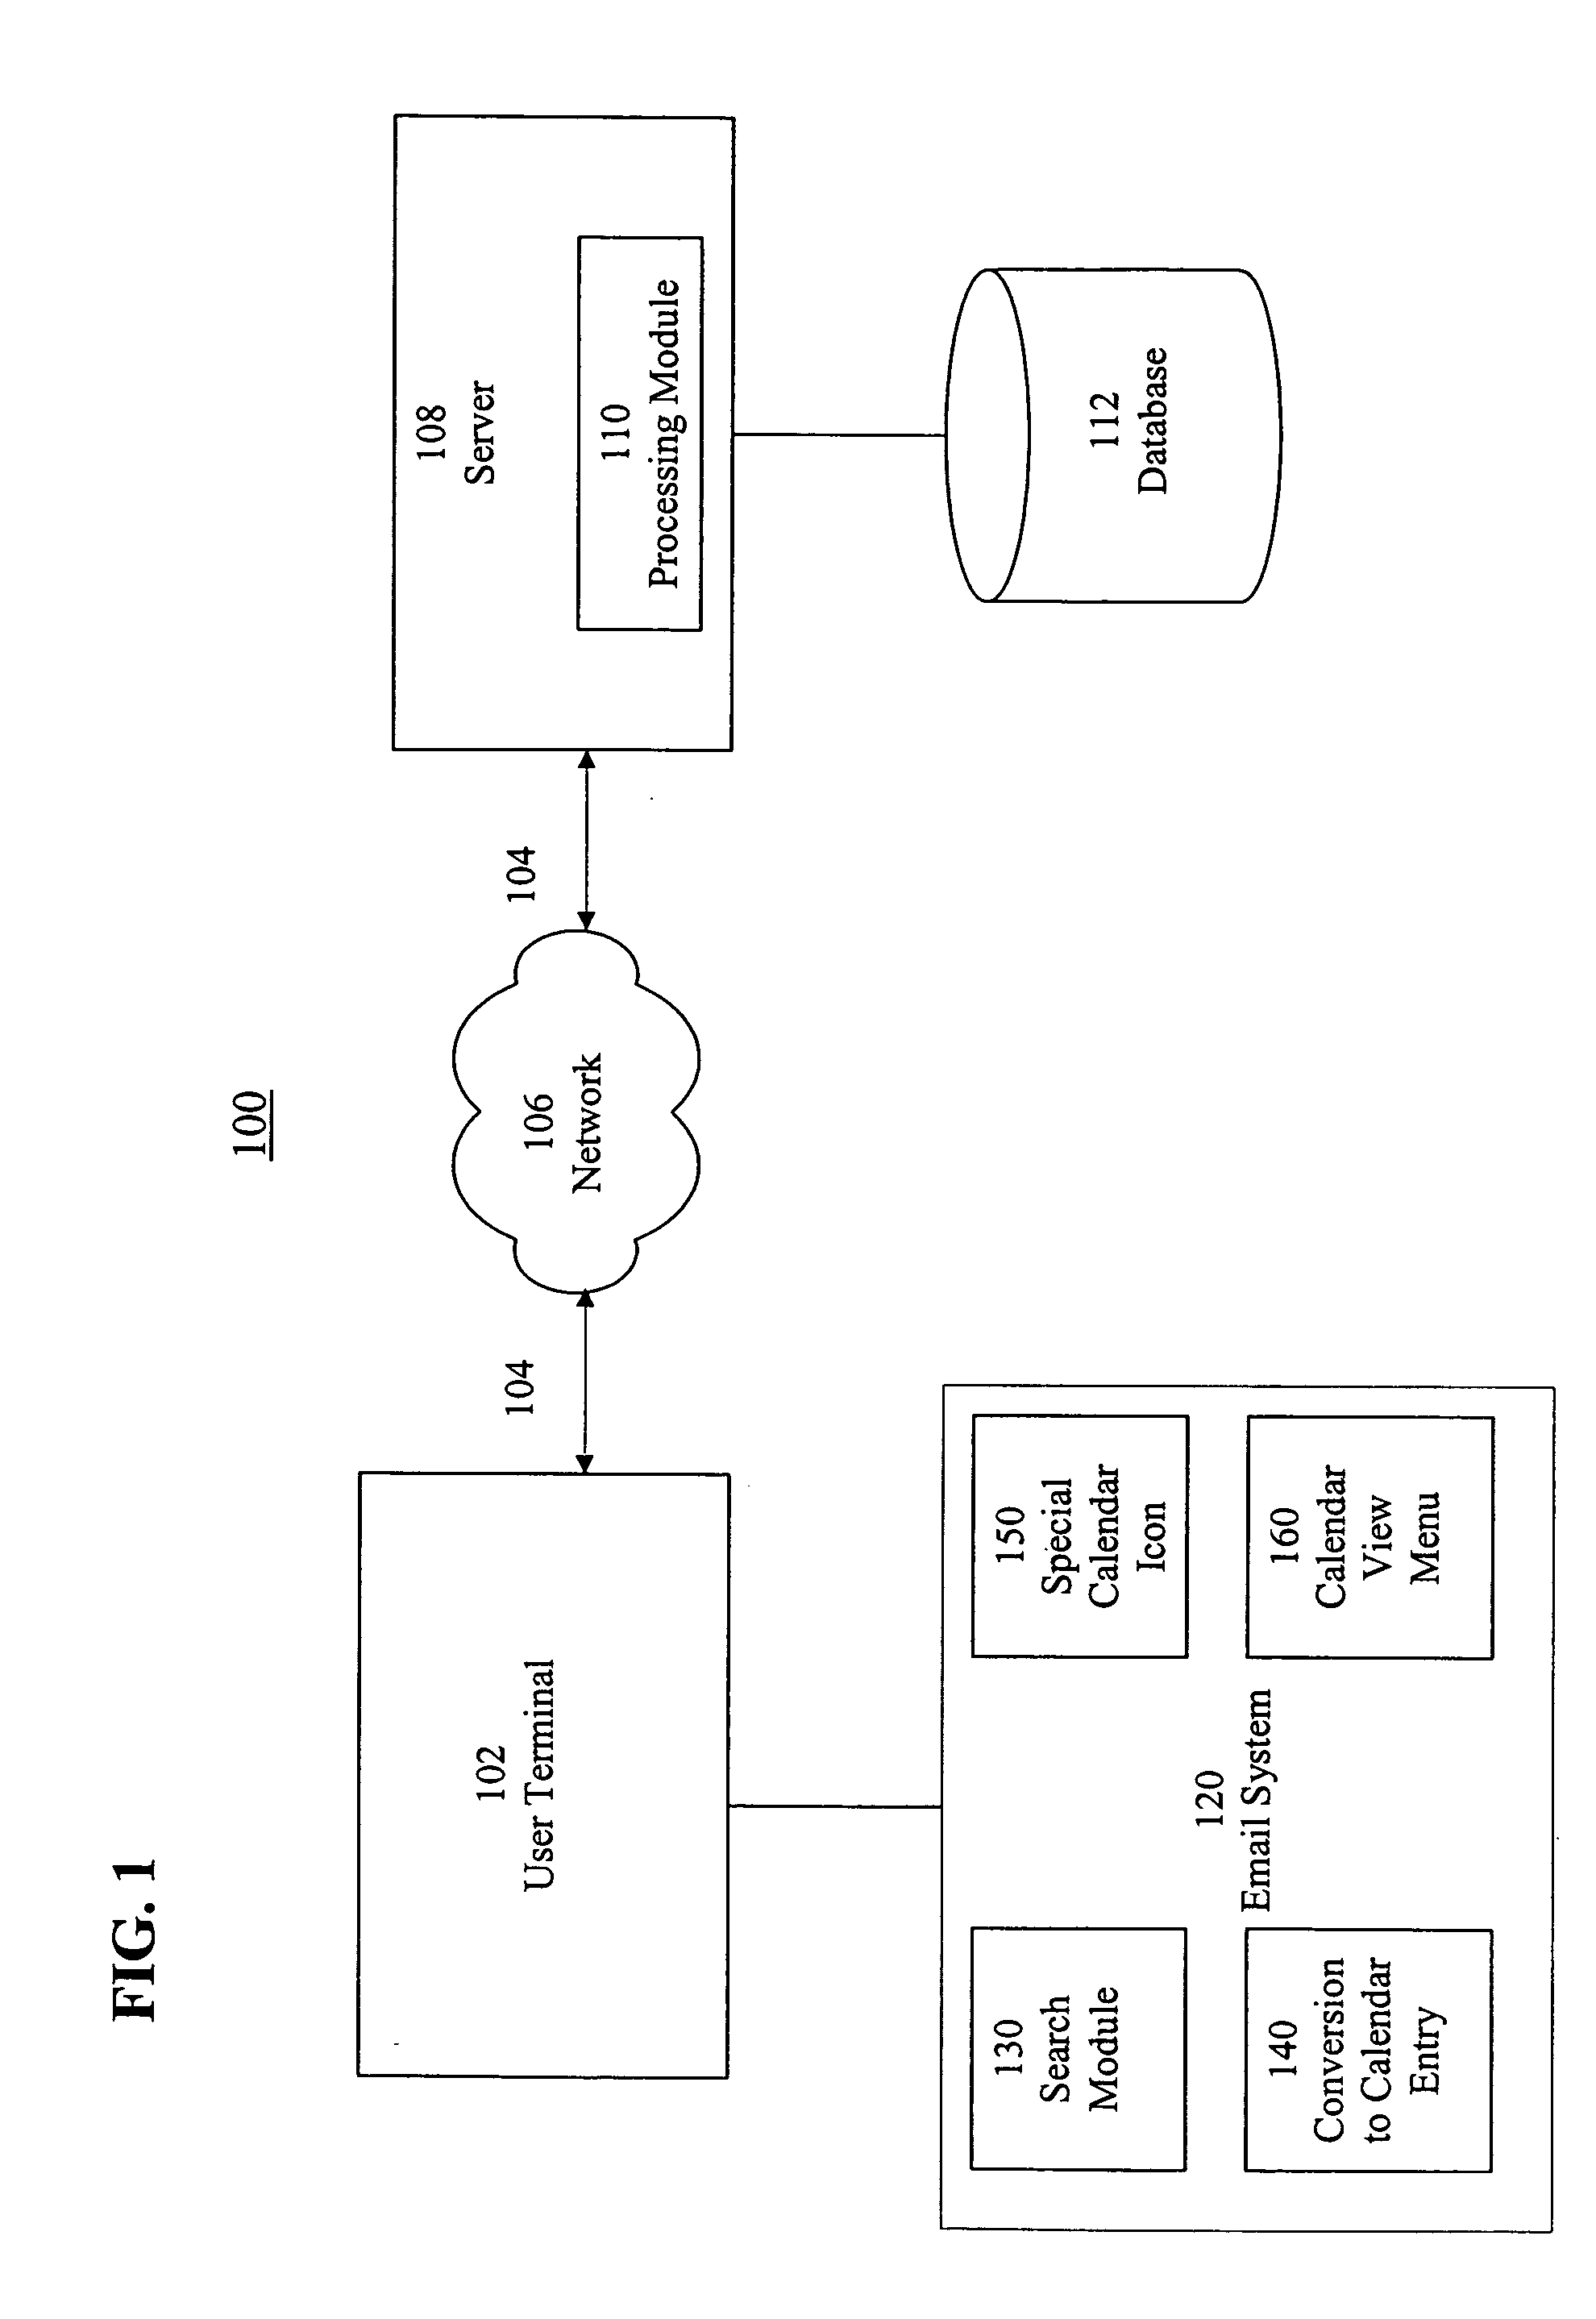 System and method for managing documents with expression of dates and/or times